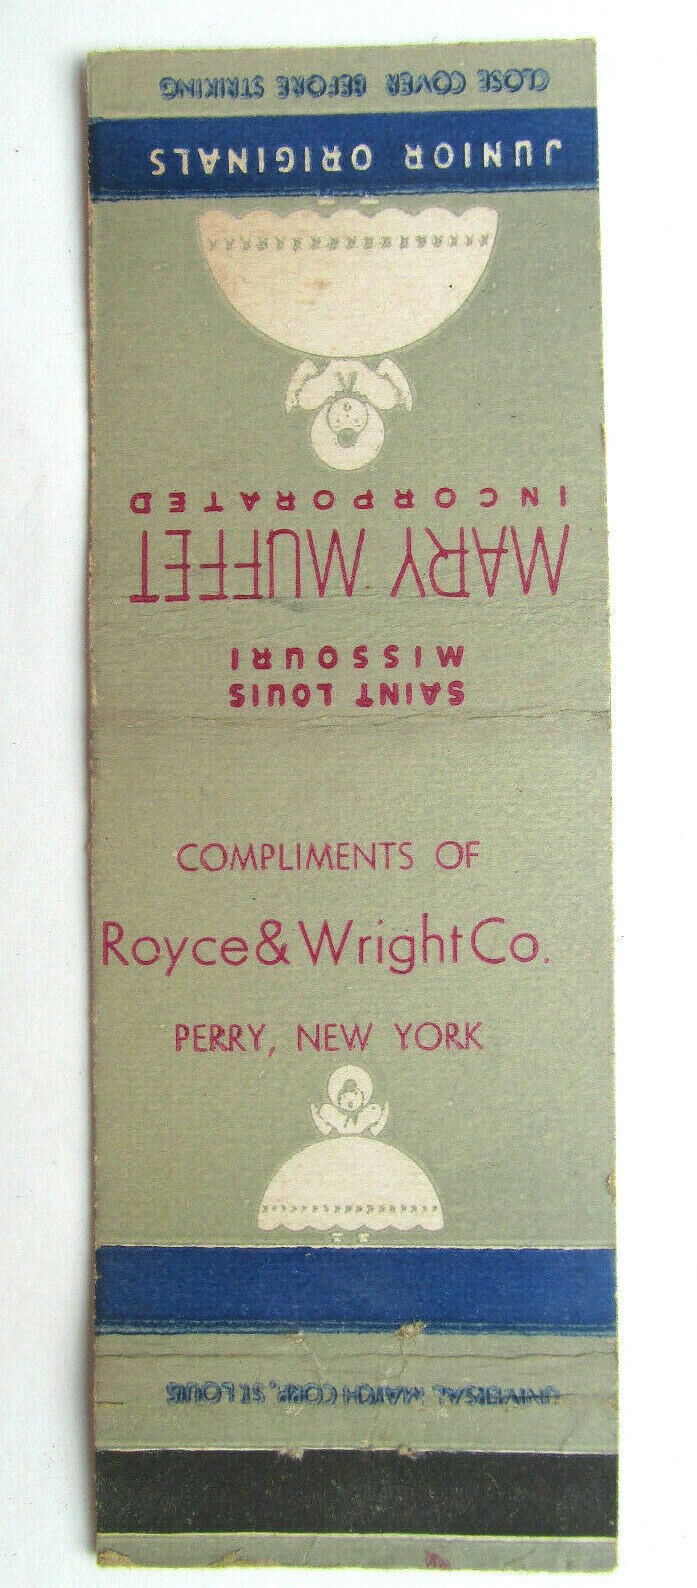 Primary image for Royce & Wright Co. - Perry, New York Matchbook Cover Marry Muffet St. Louis, MO